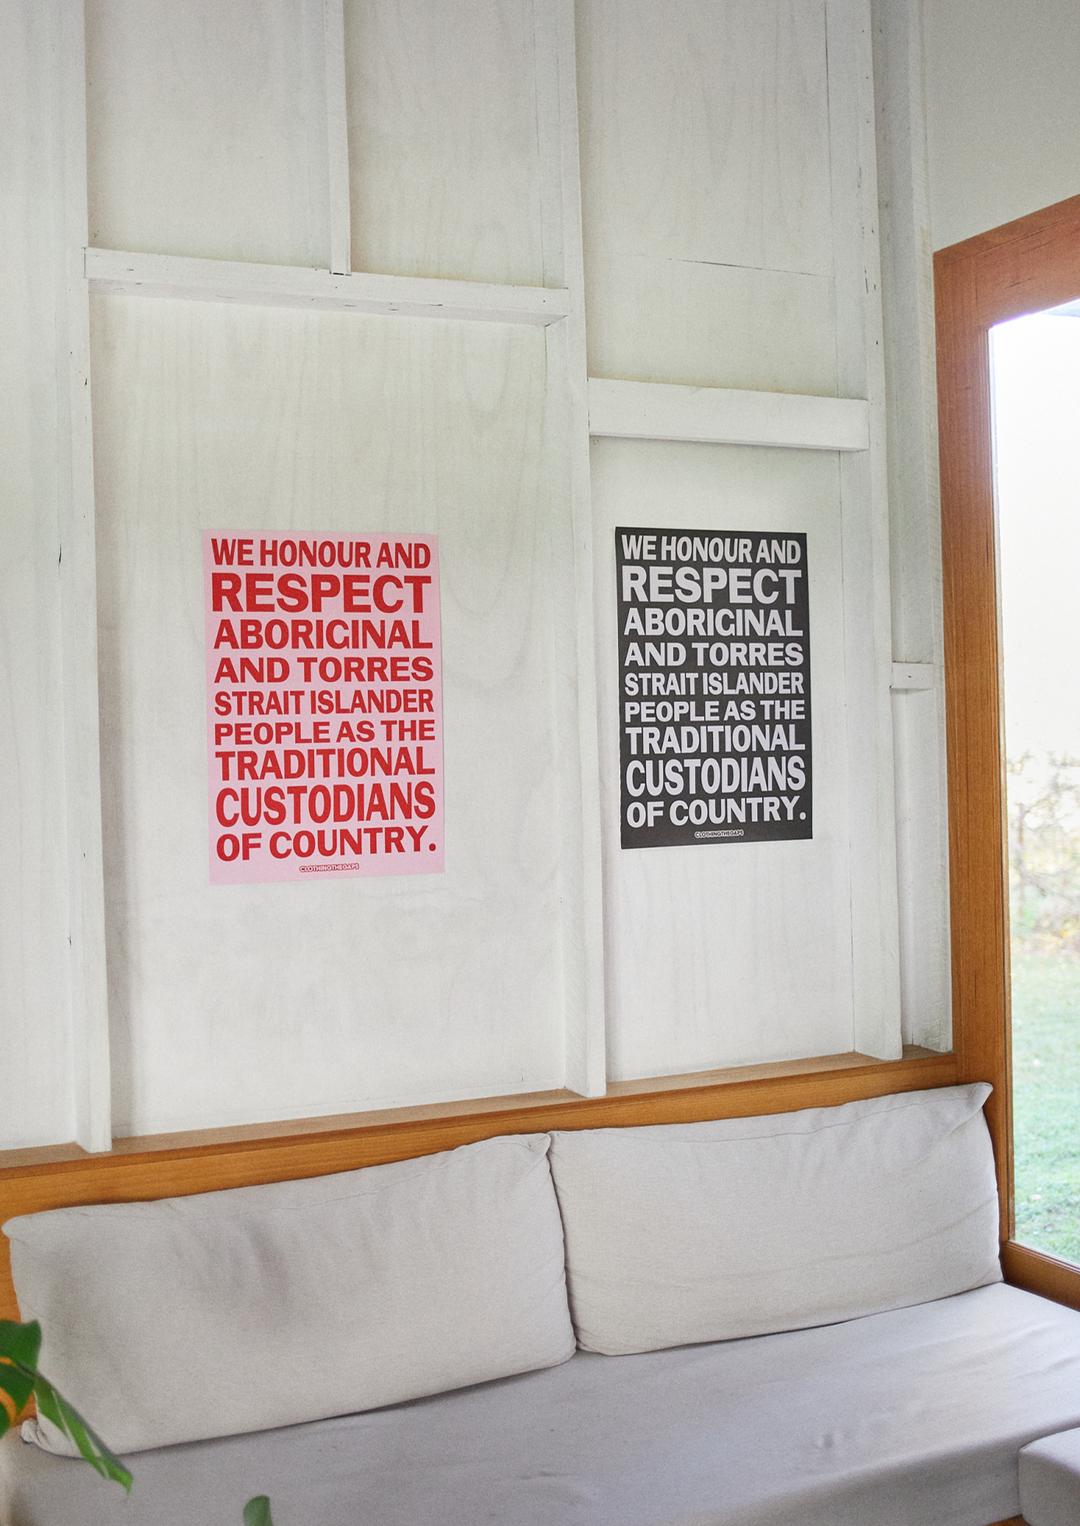 Clothing The Gaps. Honour Country Posters. Poster text 'Honour and respect Aboriginal and Torres Strait Islander people as the rightful custodians of country.' Available in Black/ White black background poster with white bold capital text and Pink/Red pink background background poster with red bold capital text.